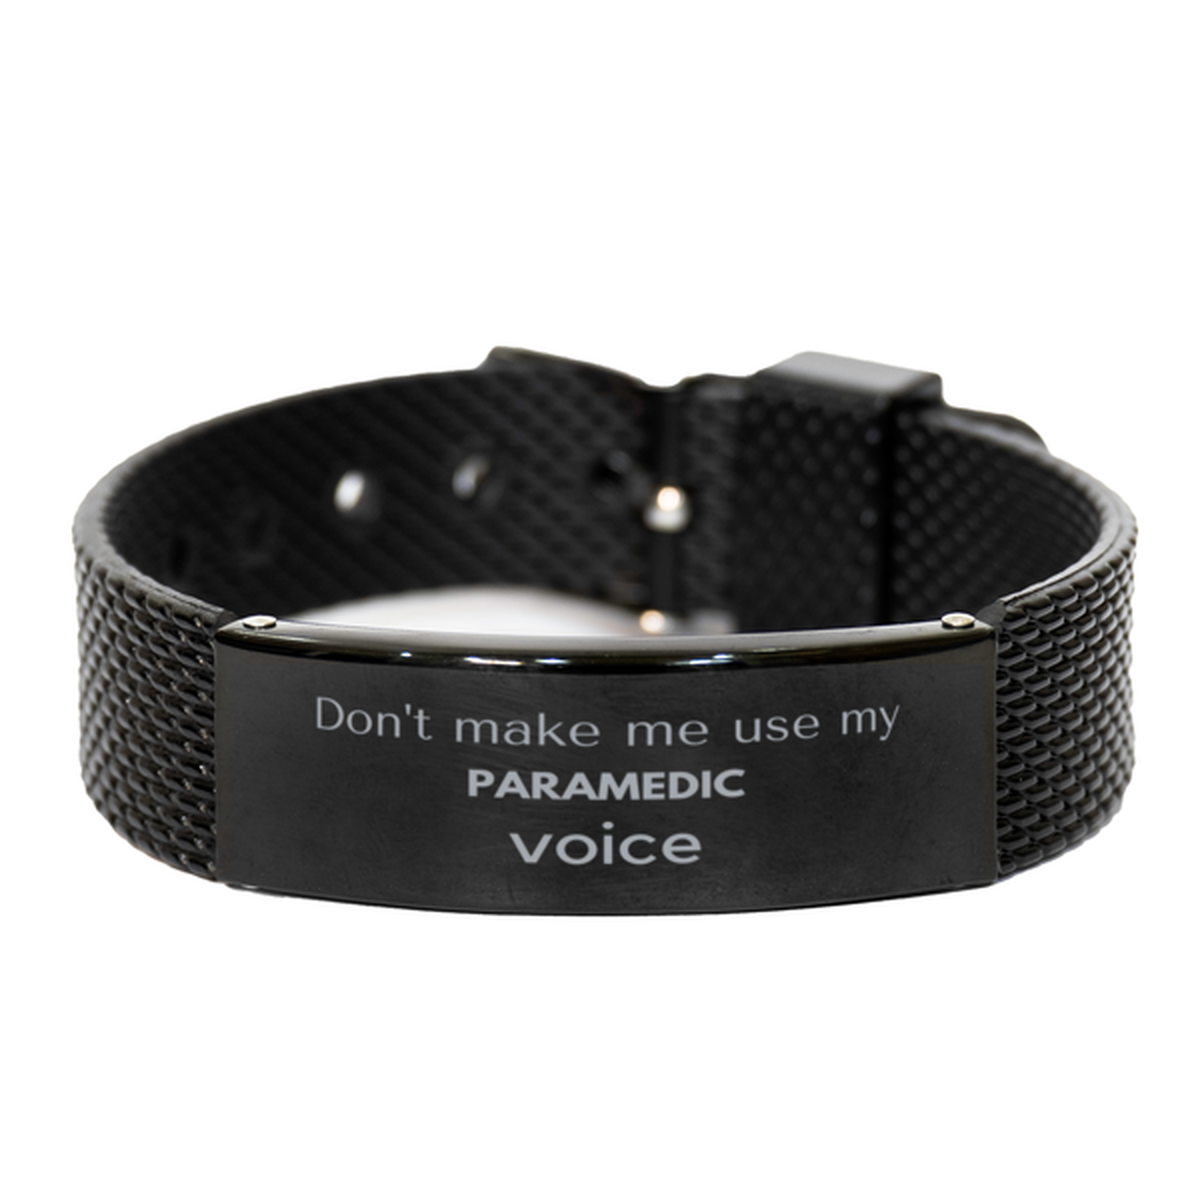 Don't make me use my Paramedic voice, Sarcasm Paramedic Gifts, Christmas Paramedic Black Shark Mesh Bracelet Birthday Unique Gifts For Paramedic Coworkers, Men, Women, Colleague, Friends